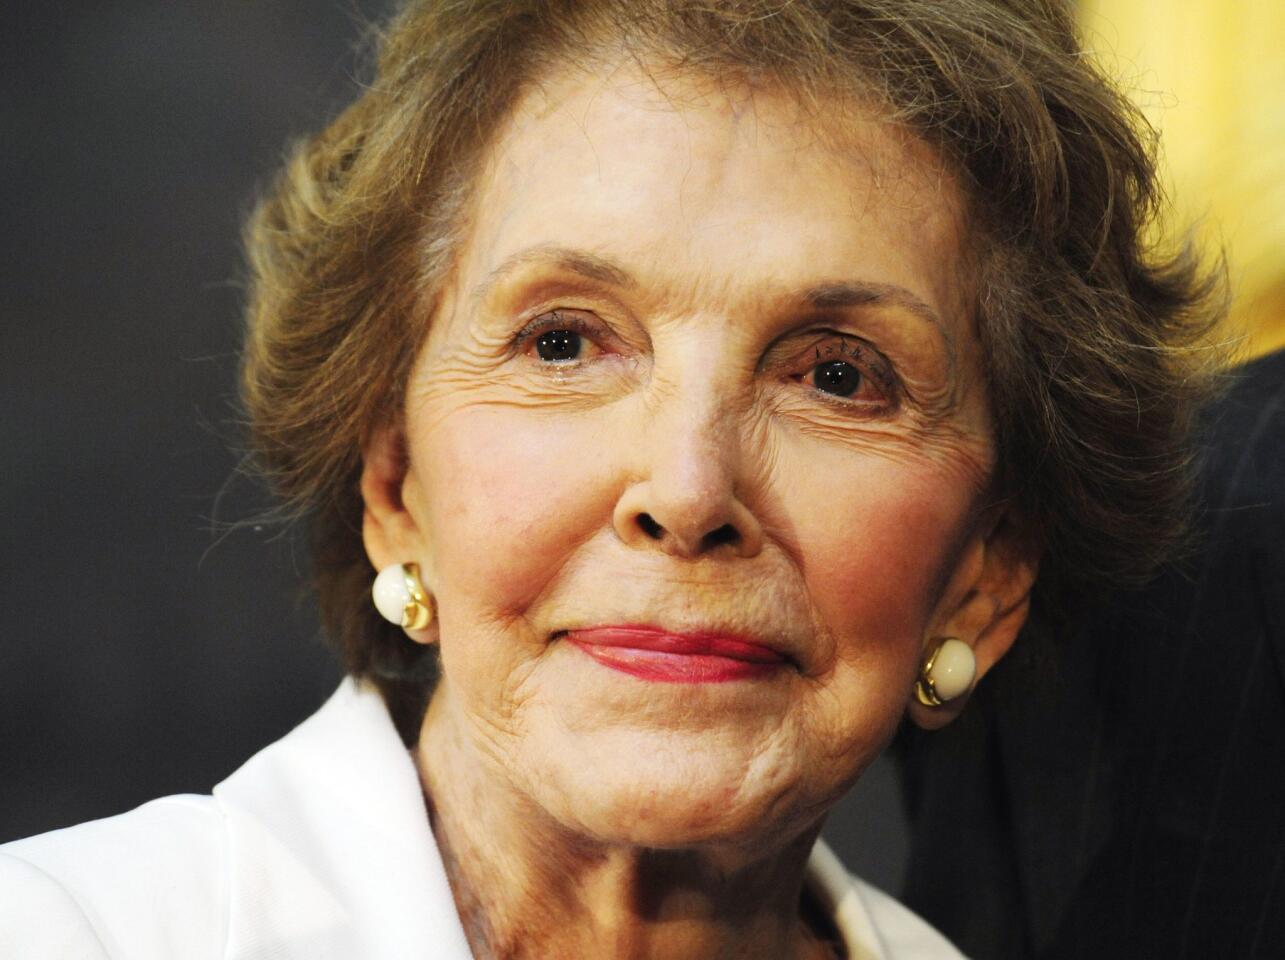 This file photo taken on June 02, 2009 shows former first lady Nancy Reagan at the unveiling of a statue of her husband, President Ronald Reagan, in Washington, DC.